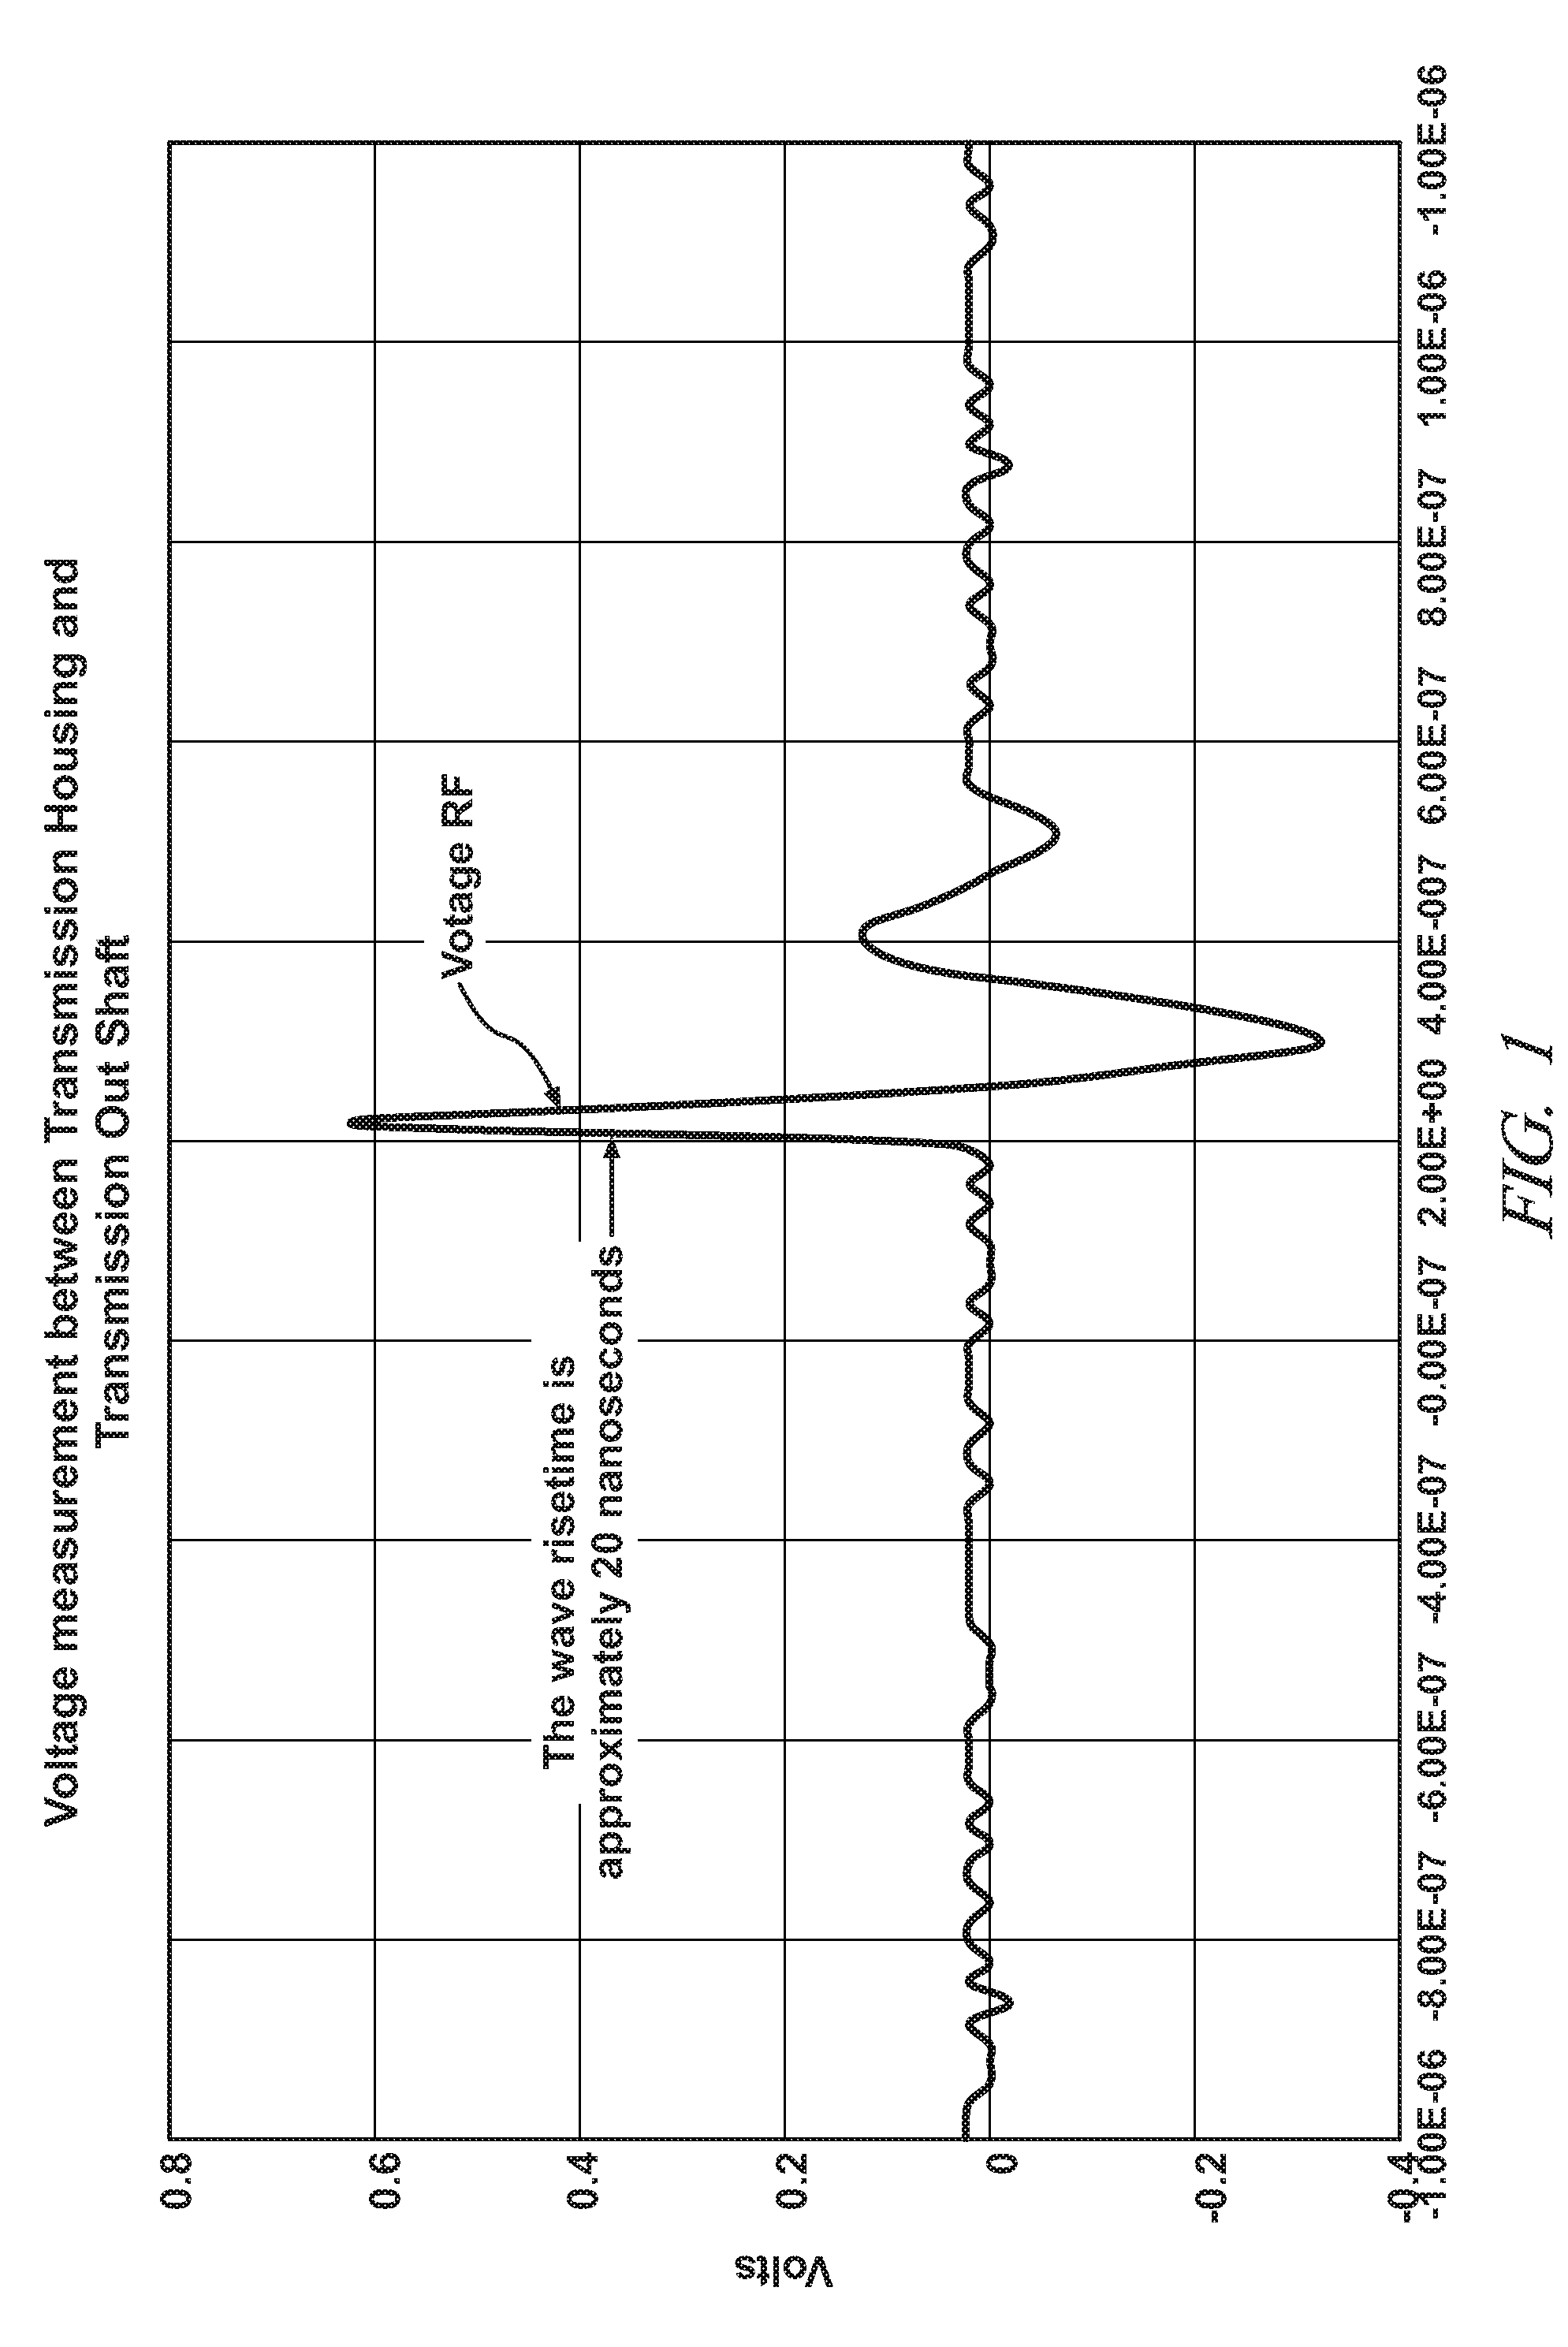 Apparatus and method for reducing stray RF signal noise in an electrically powered vehicle